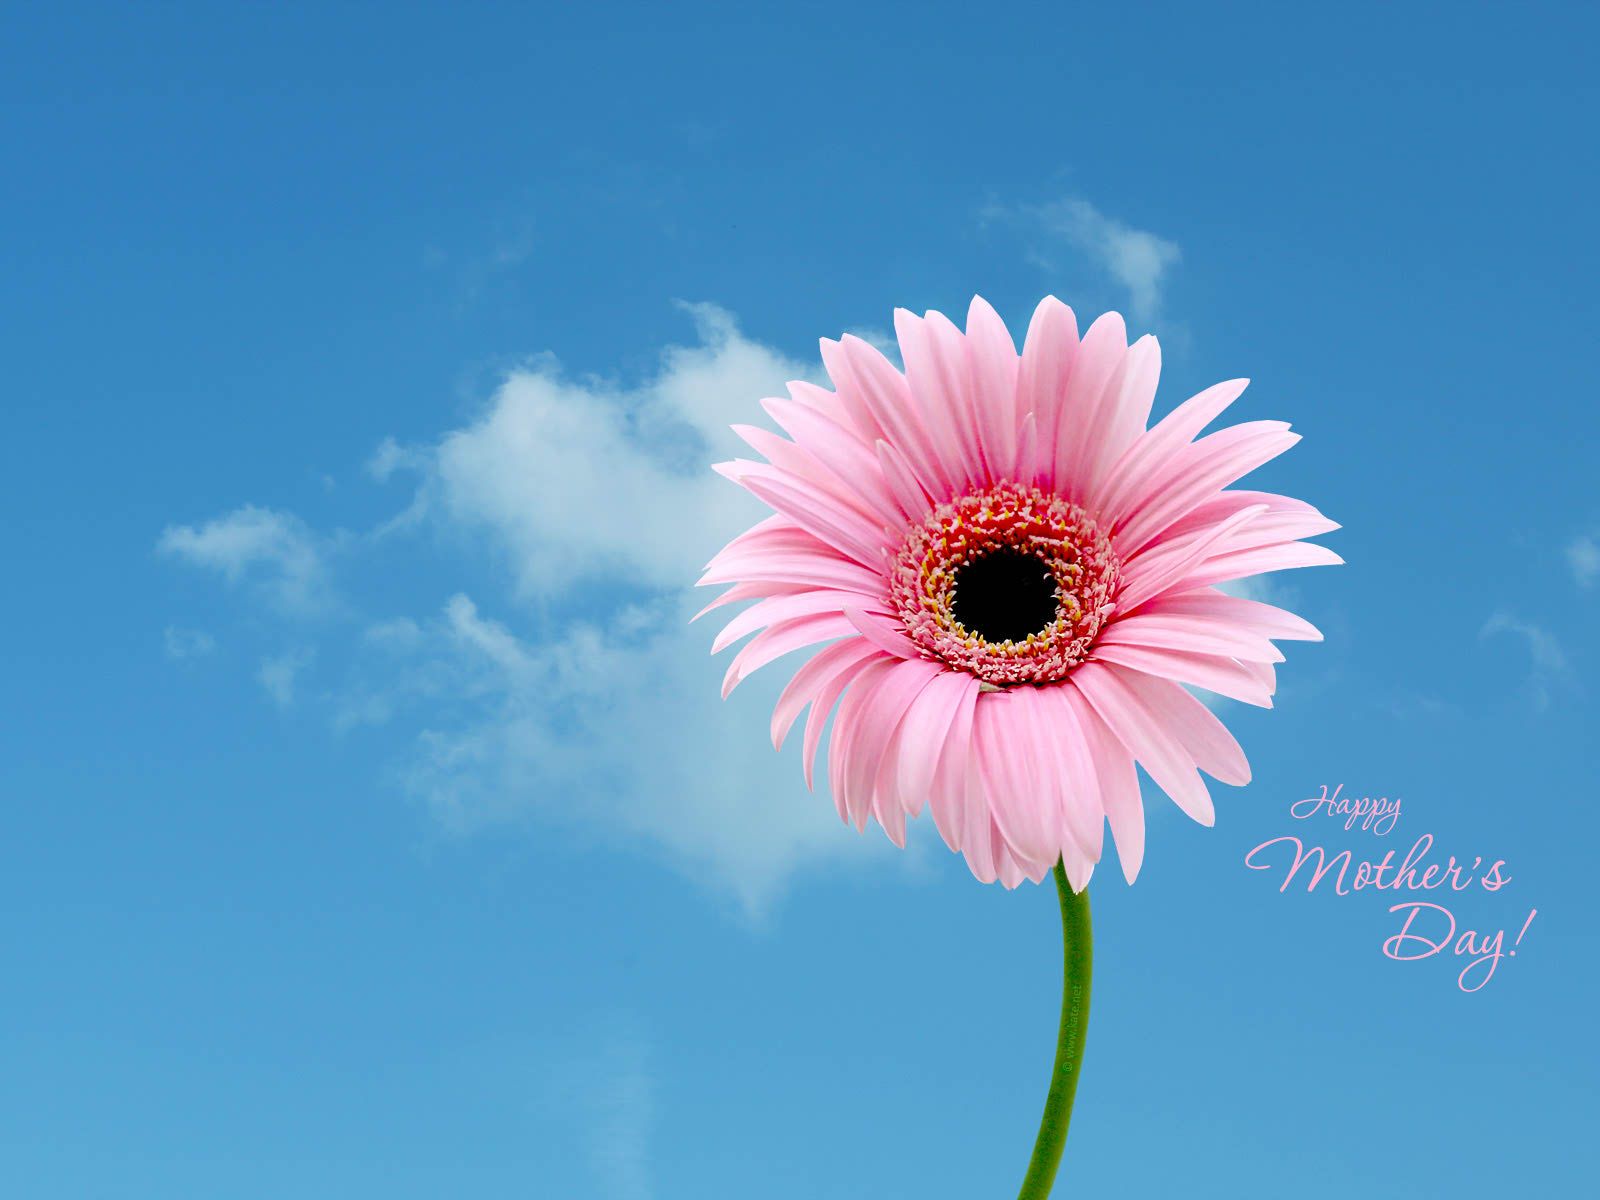 Mothers Day Wallpaper, Happy Mothers Day Photo Hd